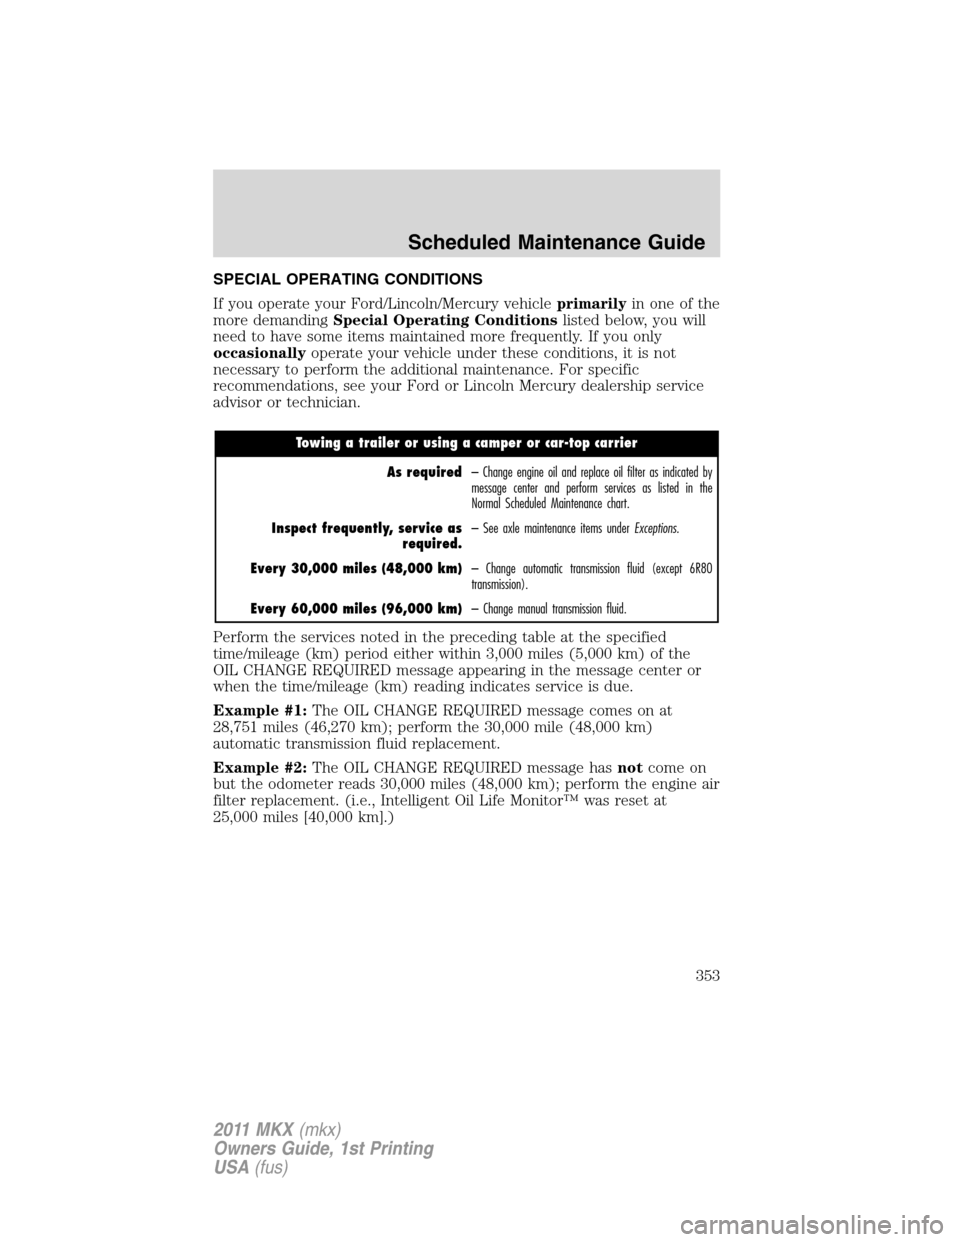 LINCOLN MKX 2011  Owners Manual SPECIAL OPERATING CONDITIONS
If you operate your Ford/Lincoln/Mercury vehicleprimarilyin one of the
more demandingSpecial Operating Conditionslisted below, you will
need to have some items maintained 